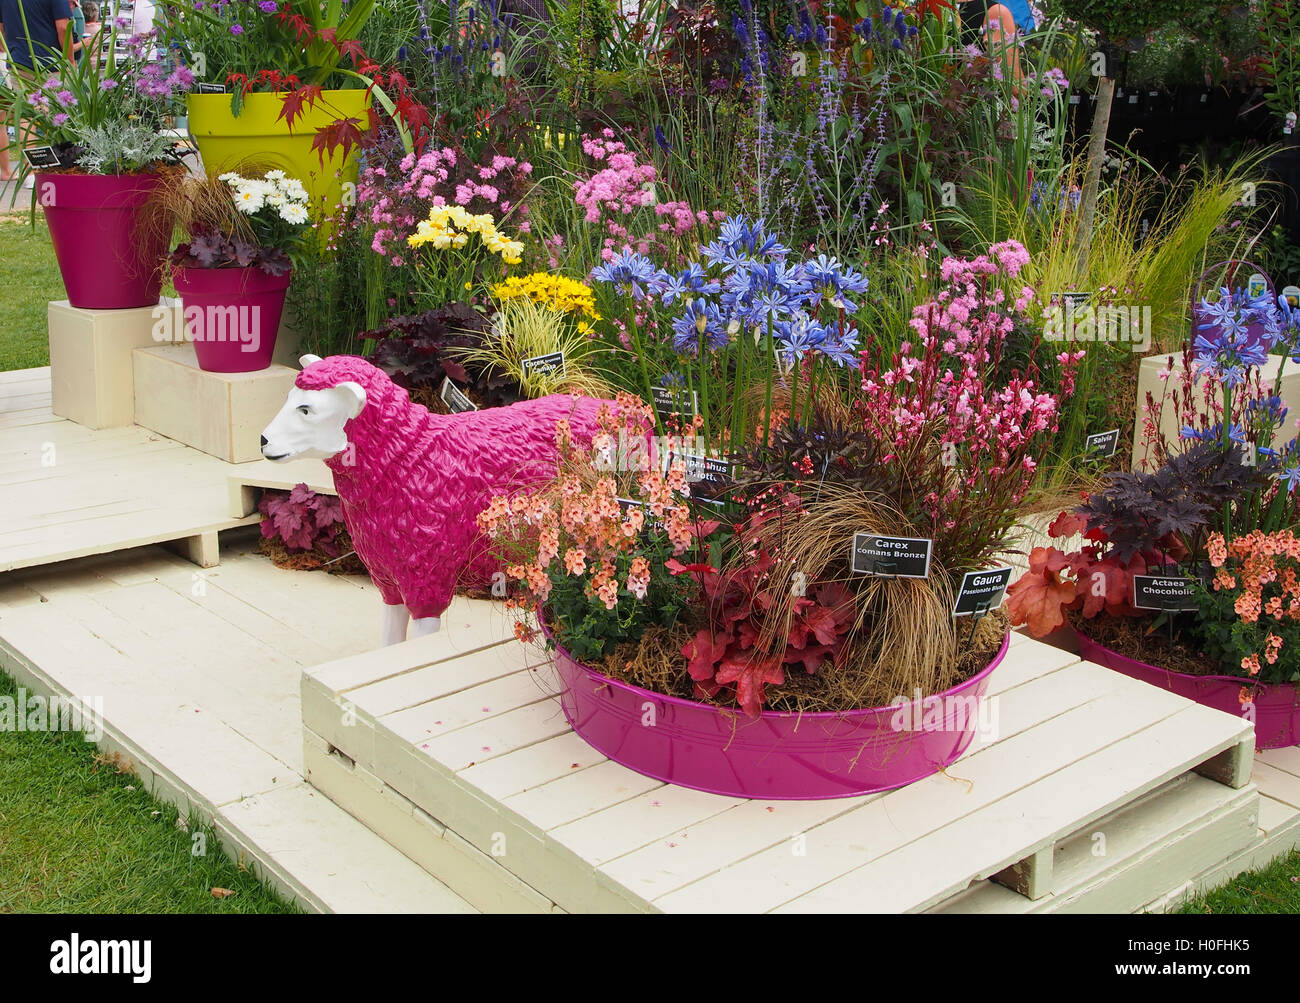 Display of various flowers growing in pink pots with a pink fibreglass sheep at Tatton Park Flower Show 2016 in Cheshire, UK. Stock Photo